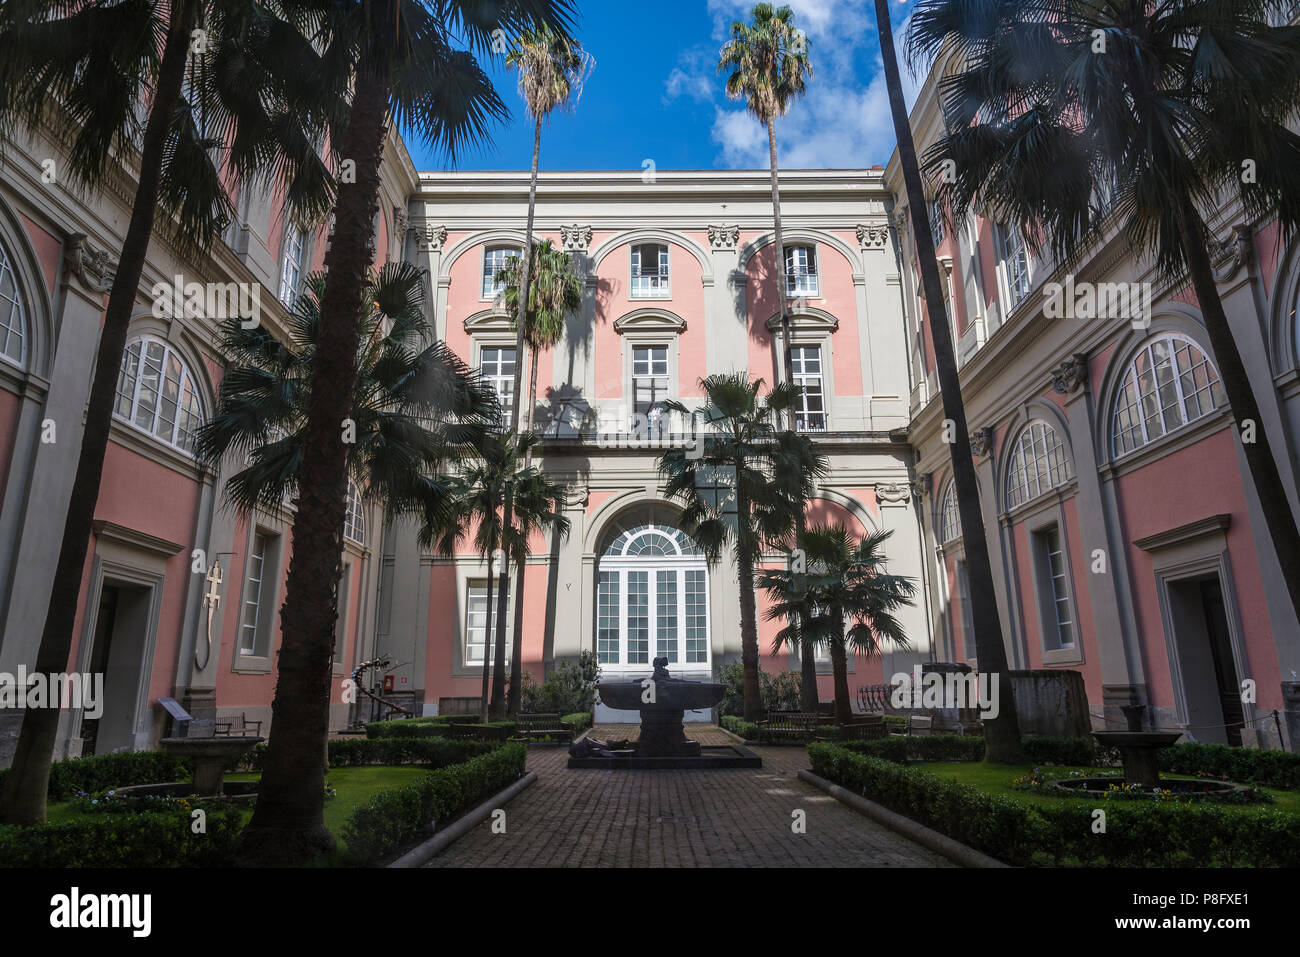 One of inner courtyards with palm trees, National Archaeological Museum, Naples, Italy Stock Photo